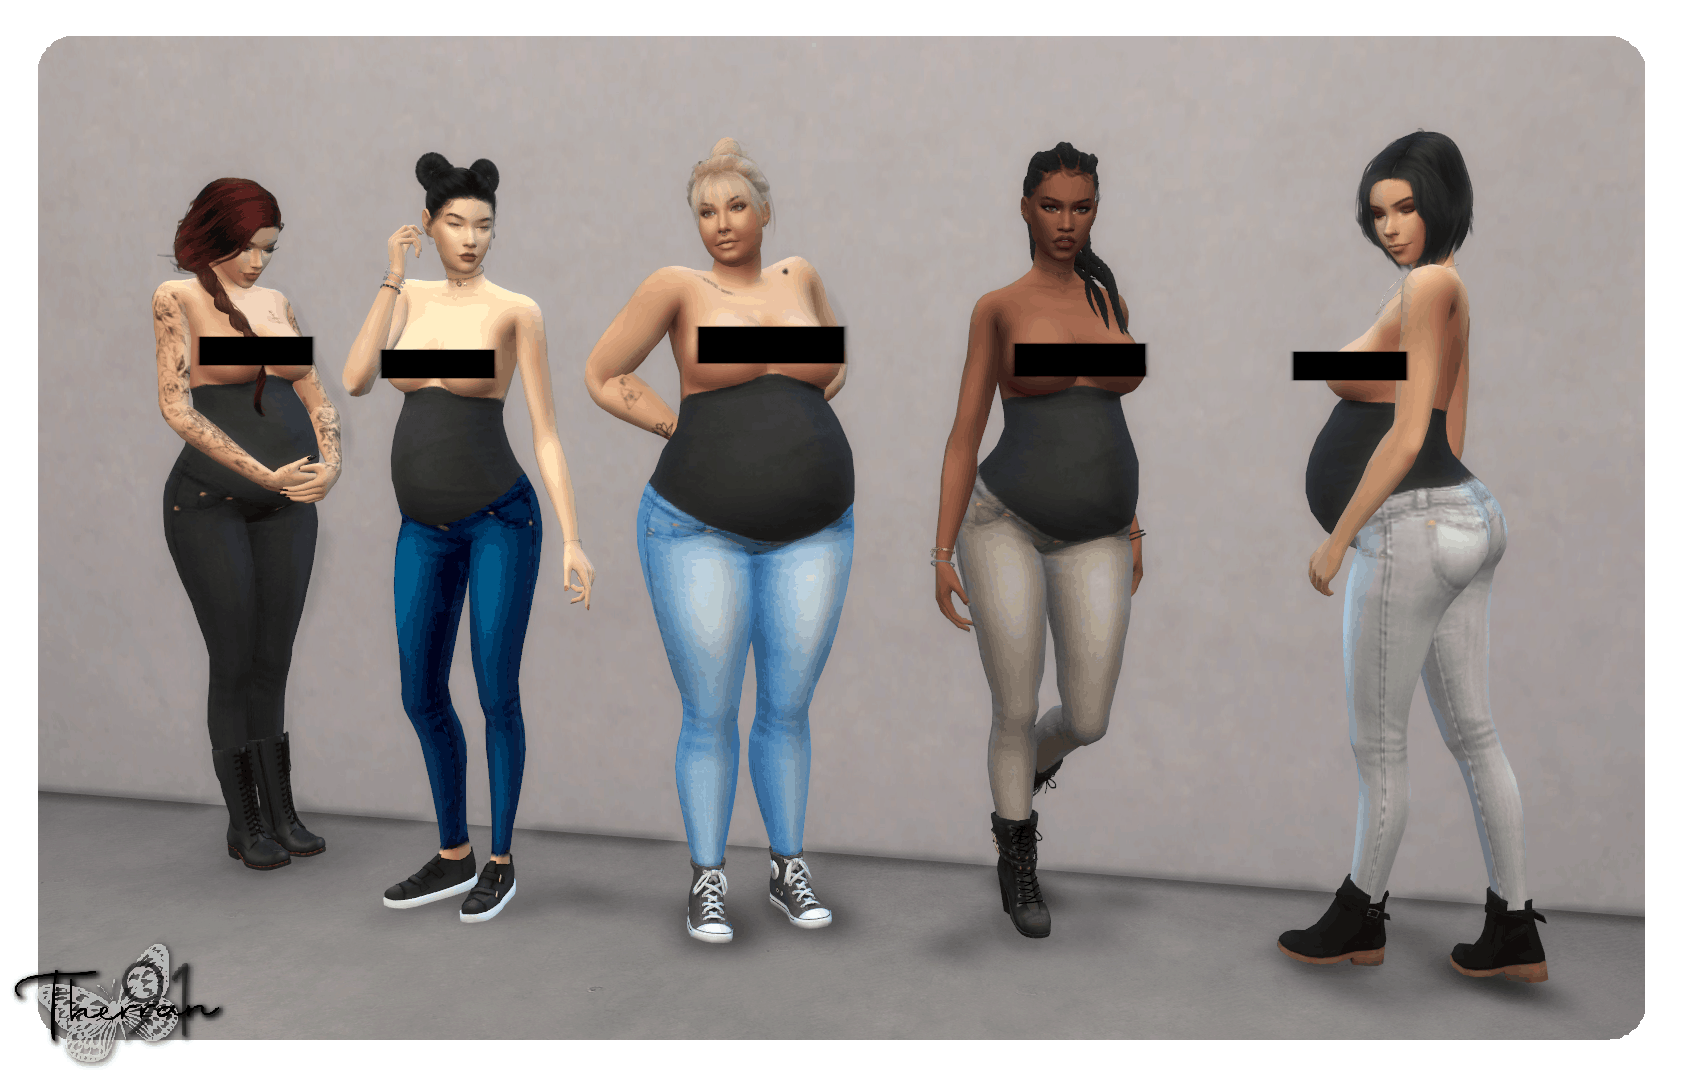 the sims 4 teen pregnancy mod download